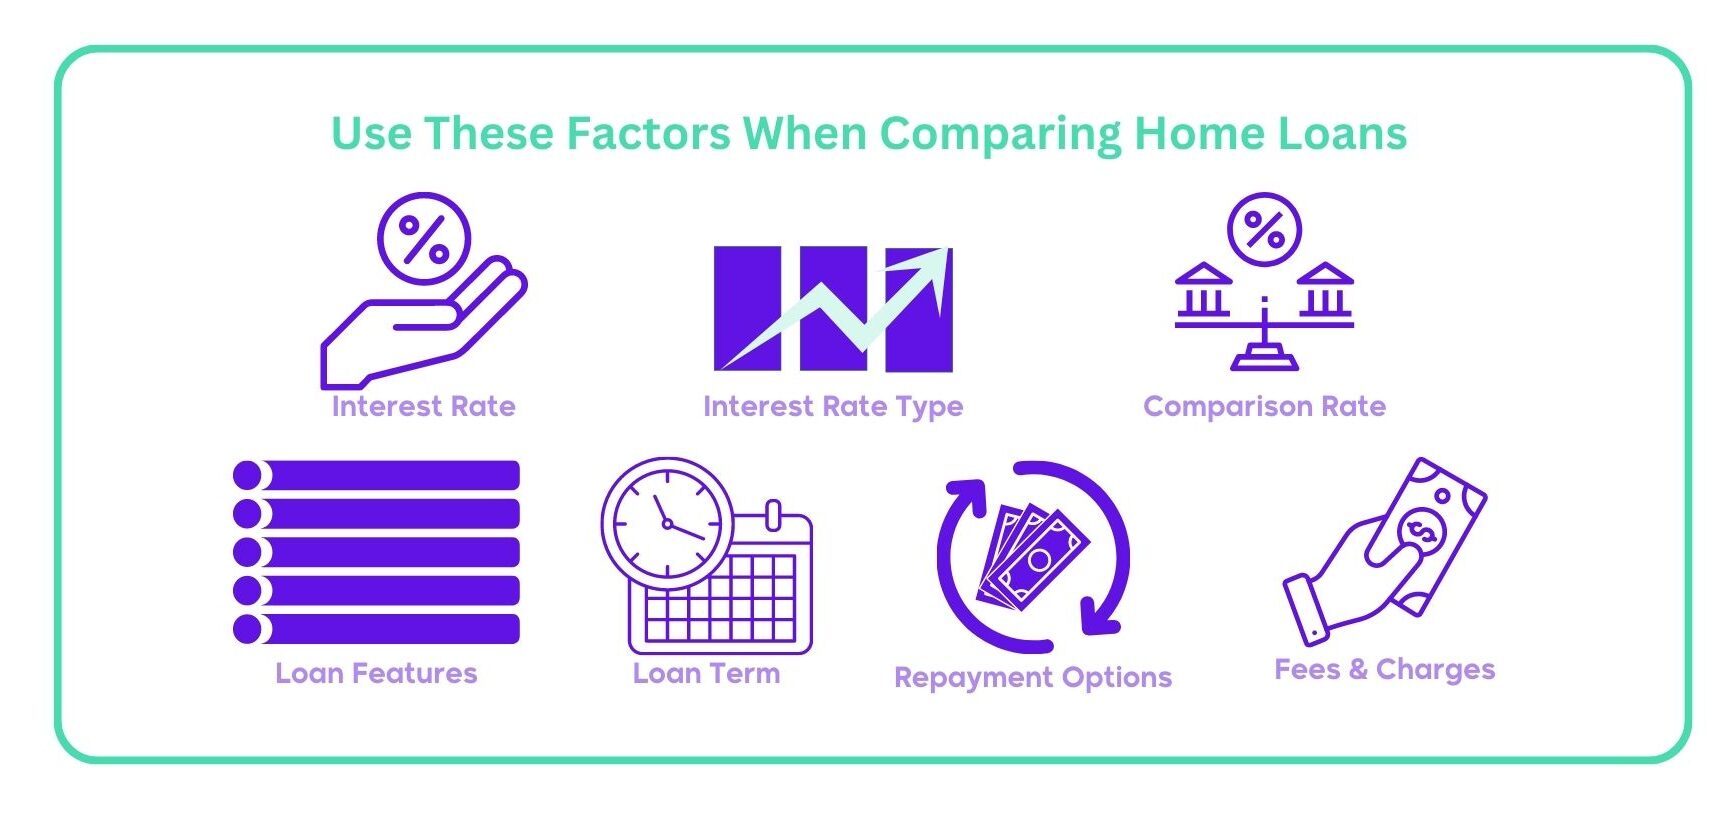 Be aware of these factors when comparing home loans